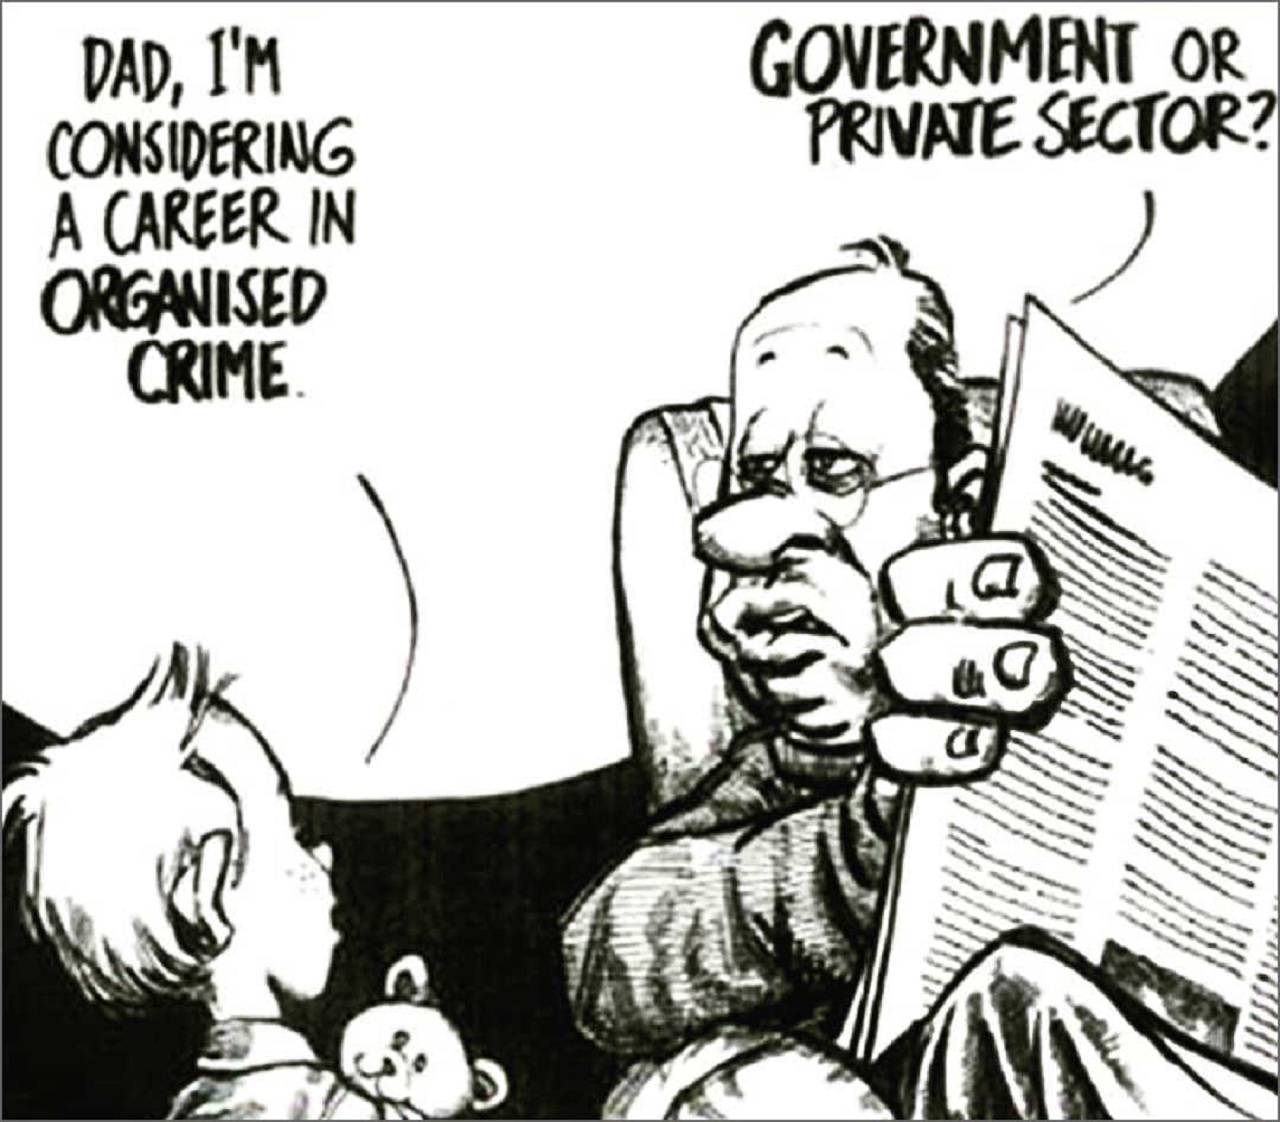 Government or Private sector